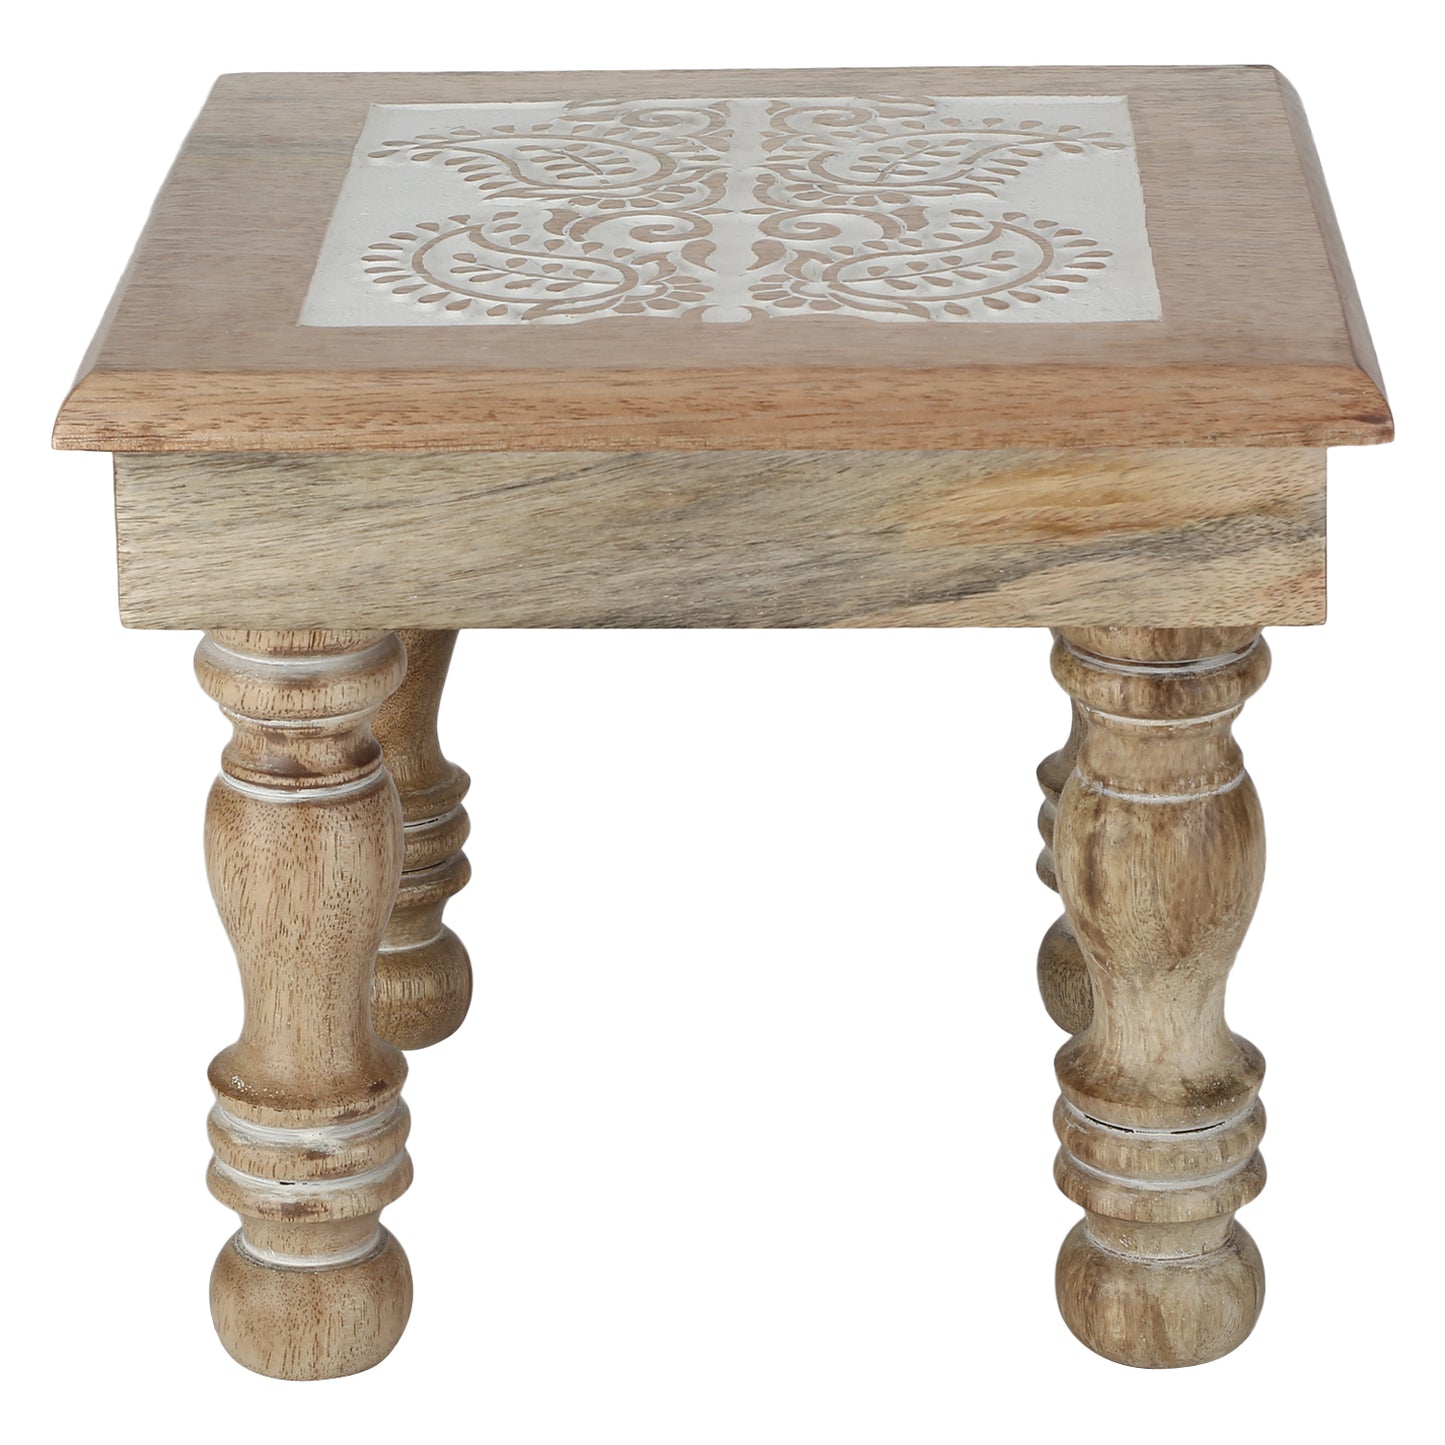 SAVON Wooden Step Stool Small Footstool footrest Table